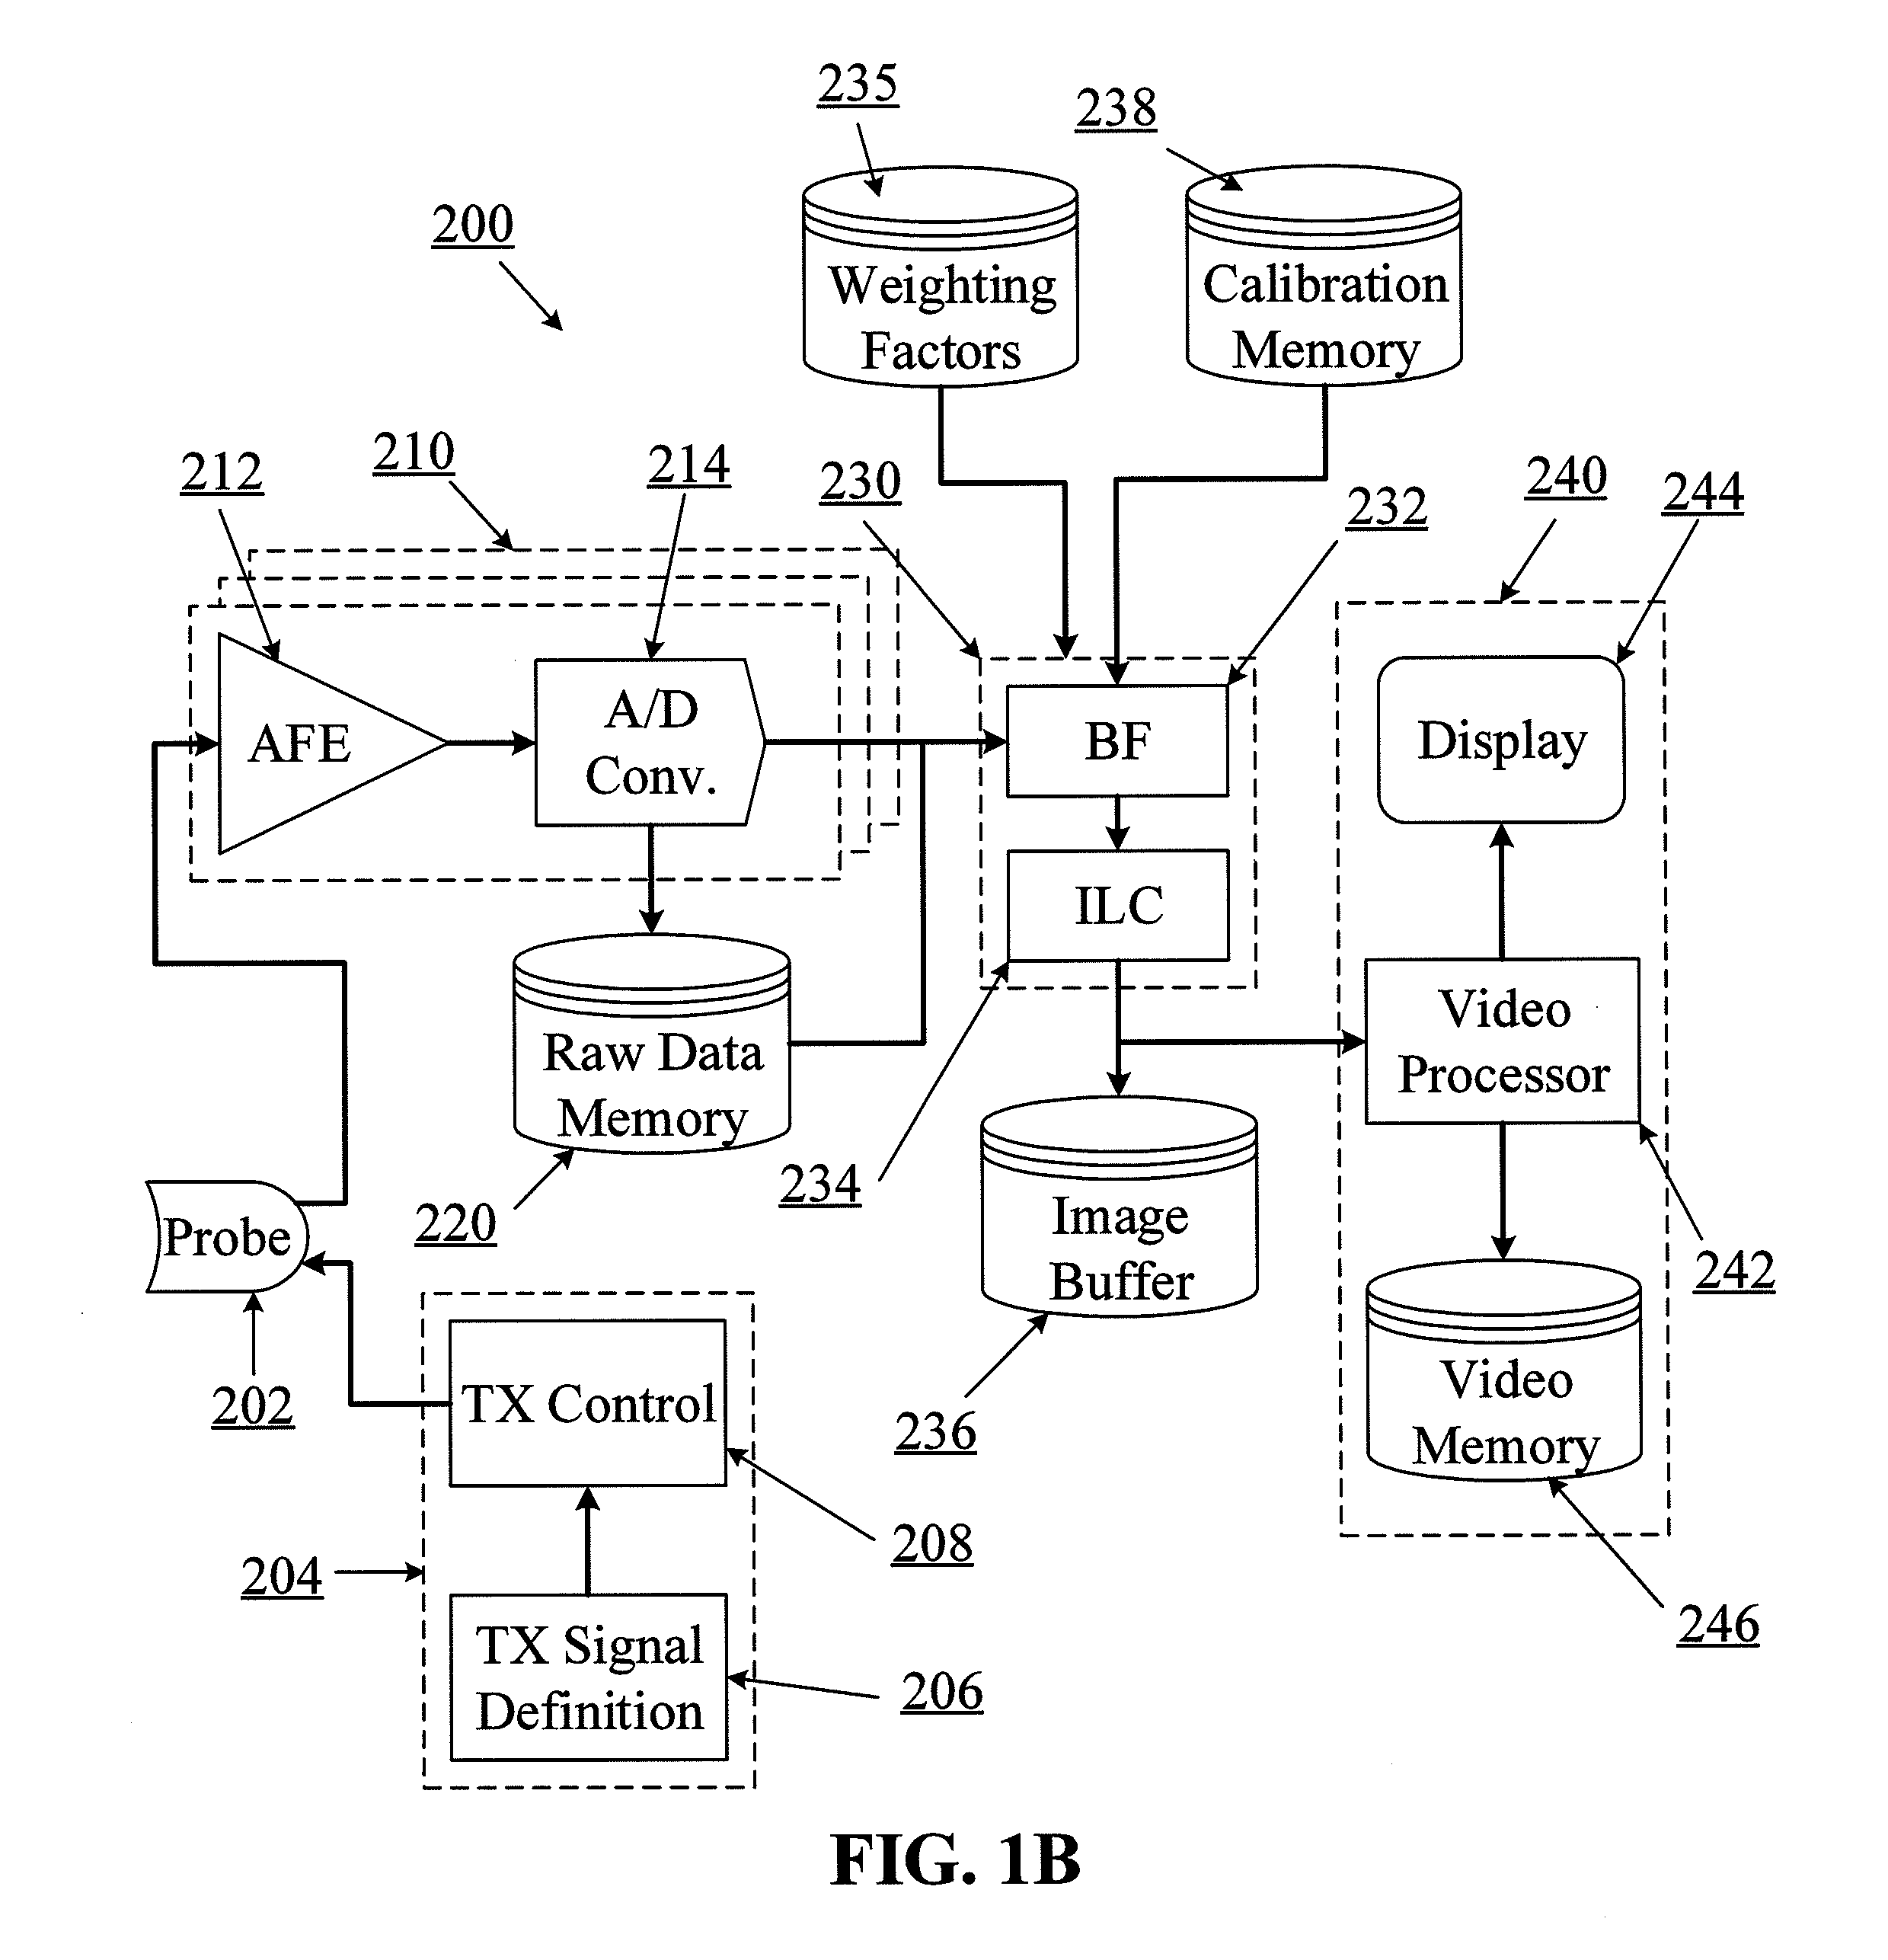 Systems and methods for improving ultrasound image quality by applying weighting factors